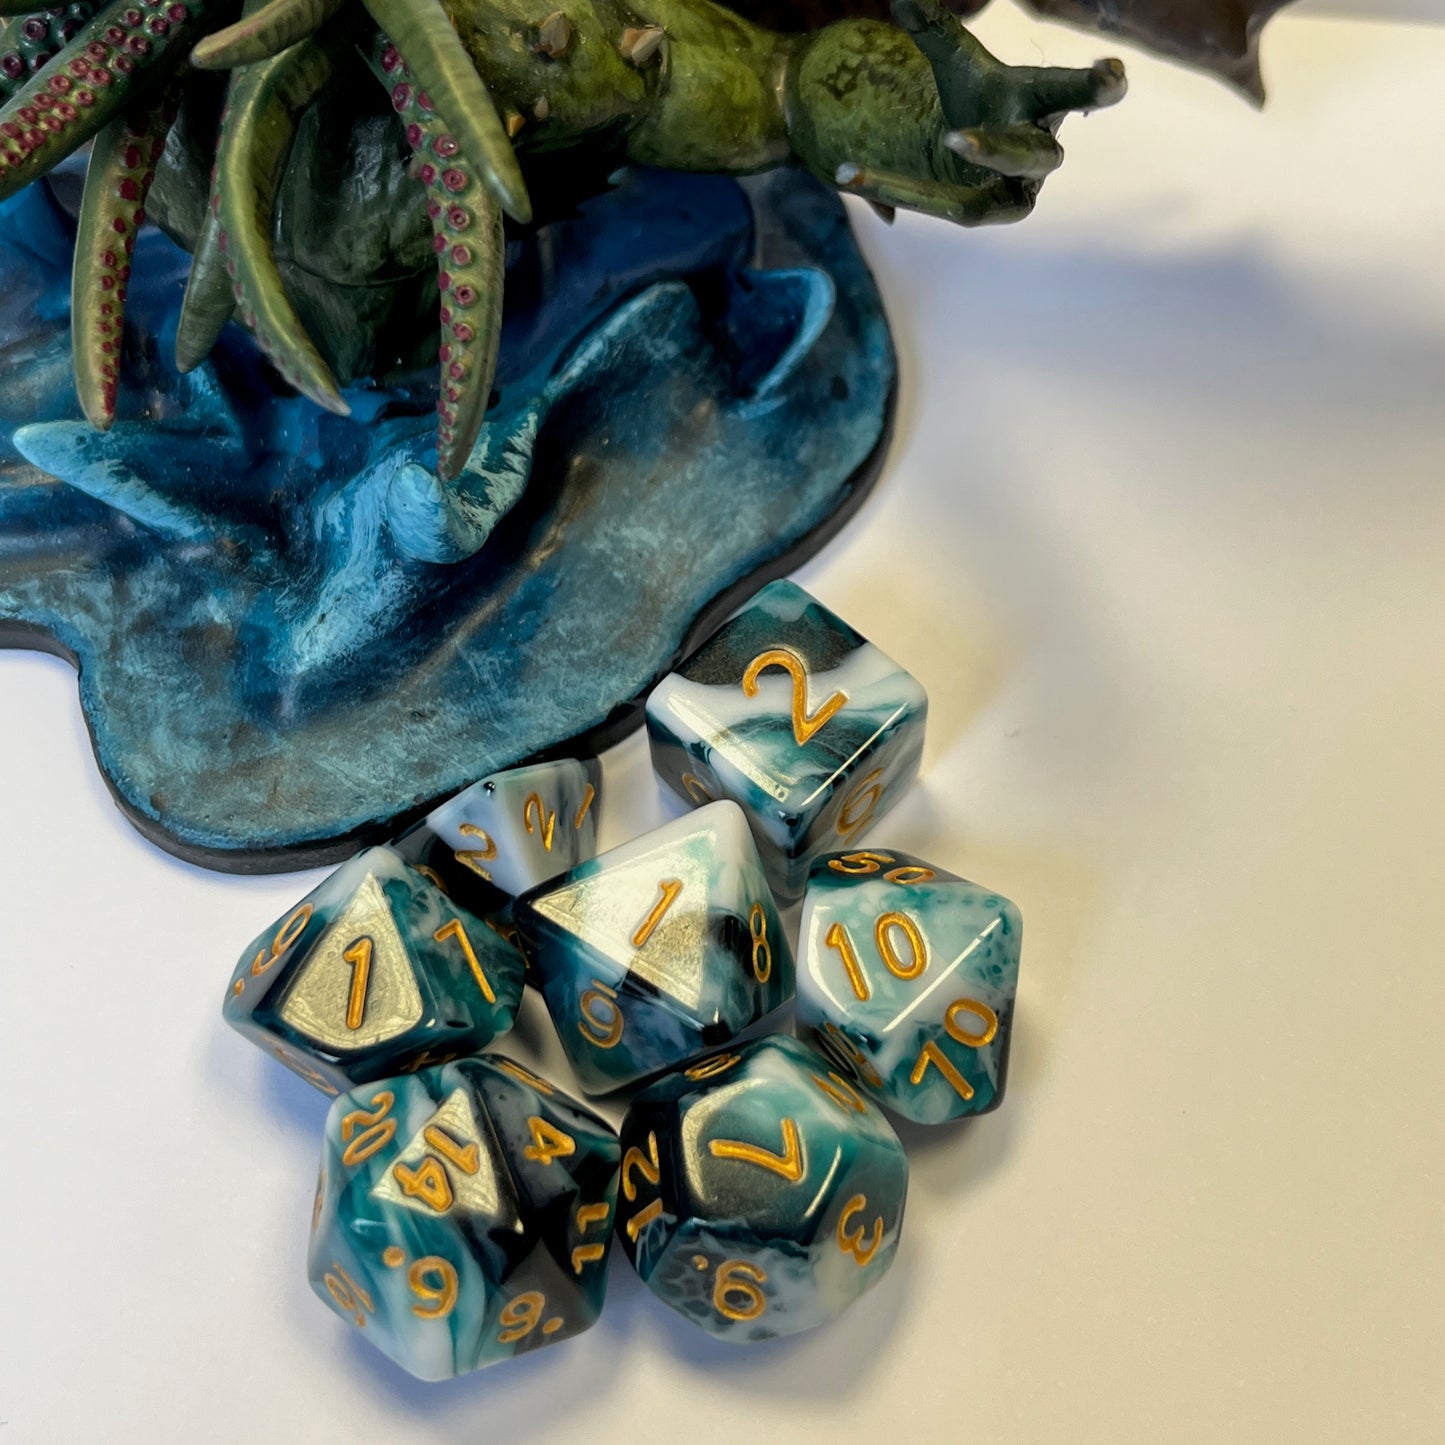 Tempest dnd dice set, teal dice set, DND, dungeons and dragons, role playing games, dice goblin and critical critters